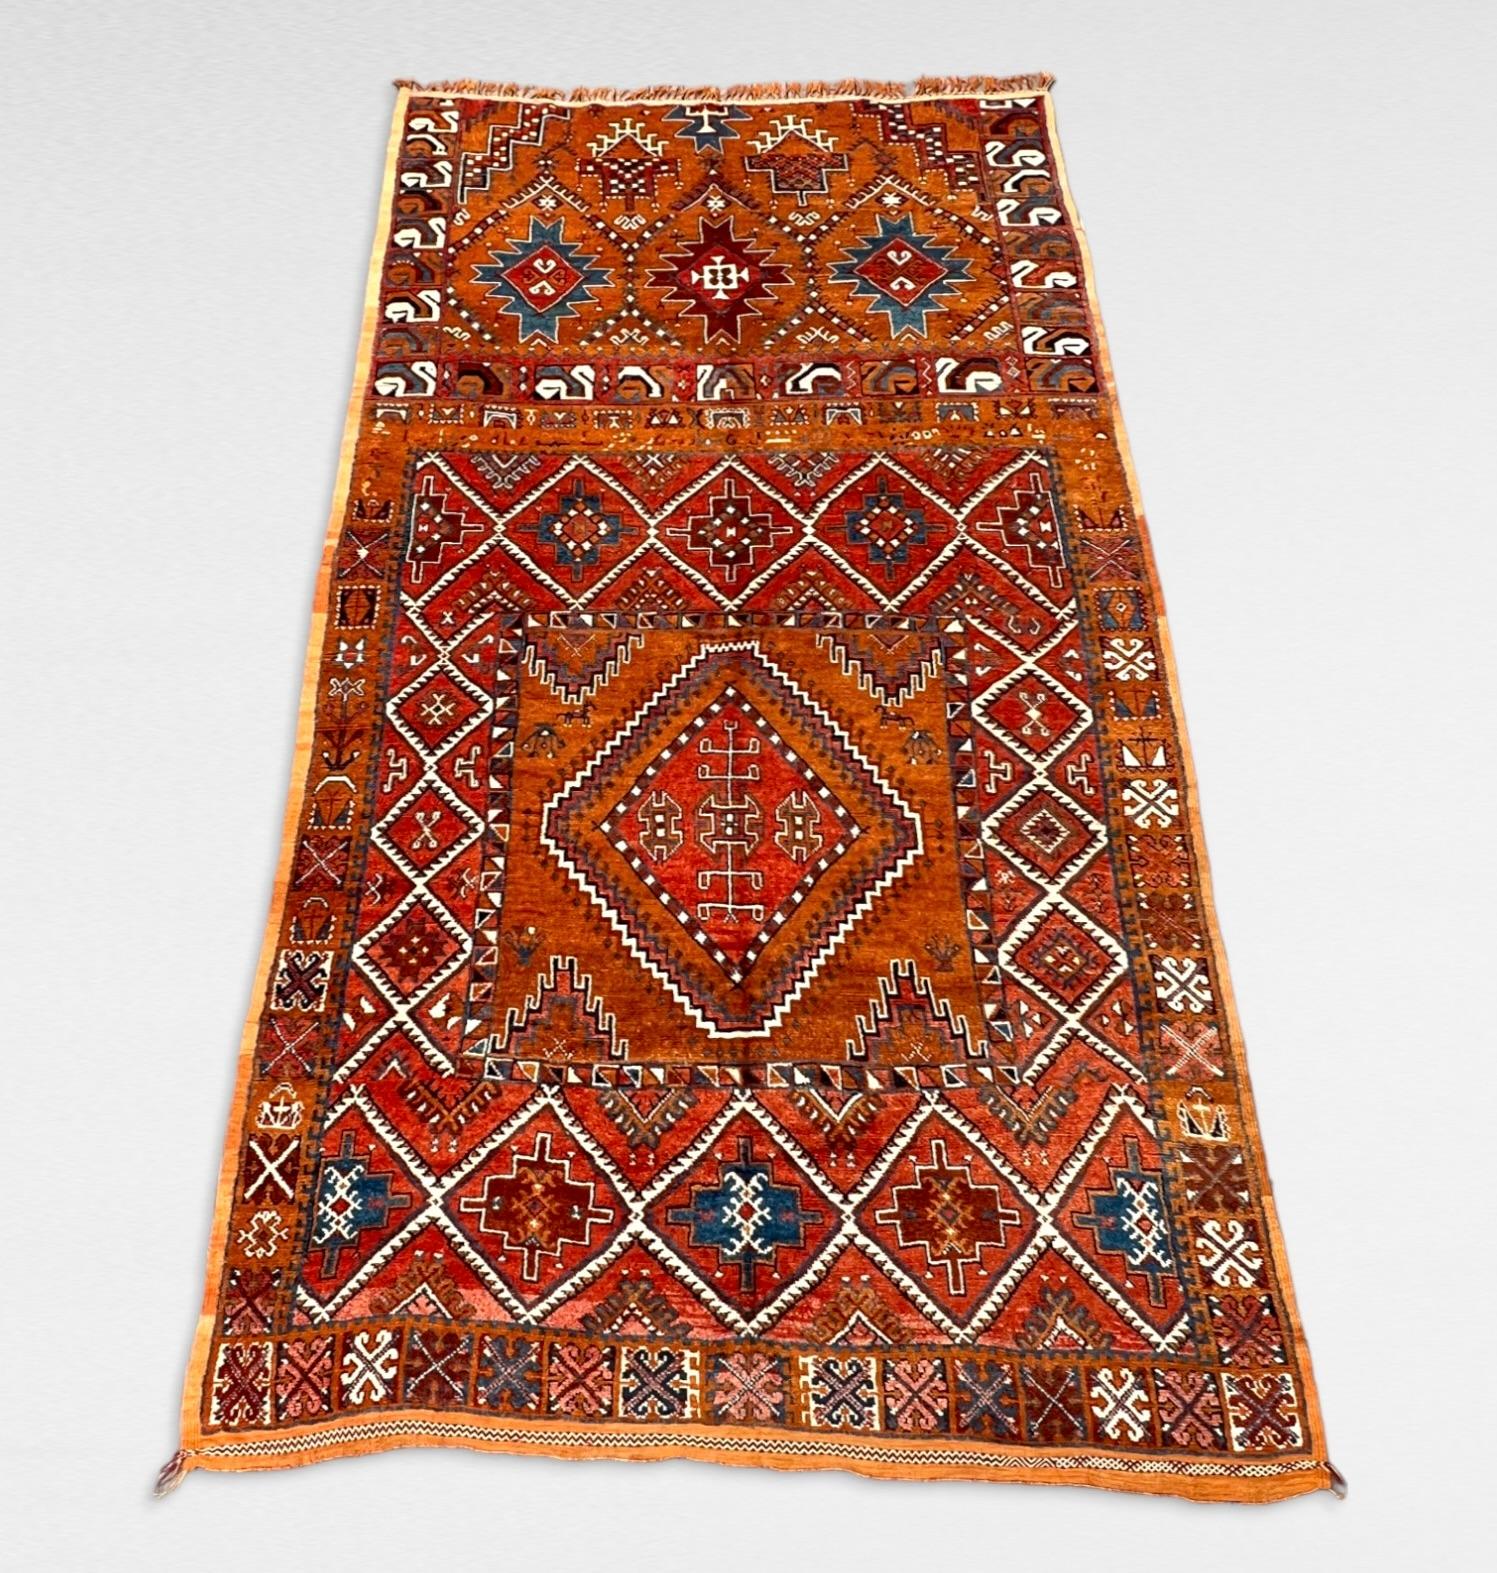 A collectors piece.

Crafted by tribes affiliated with the esteemed Ait Ouaouzguite tribal confederation, this exquisite woollen rug emanate from the mystical Jbel Siroua region of Morocco, stretching from the majestic High Atlas Mountains in the